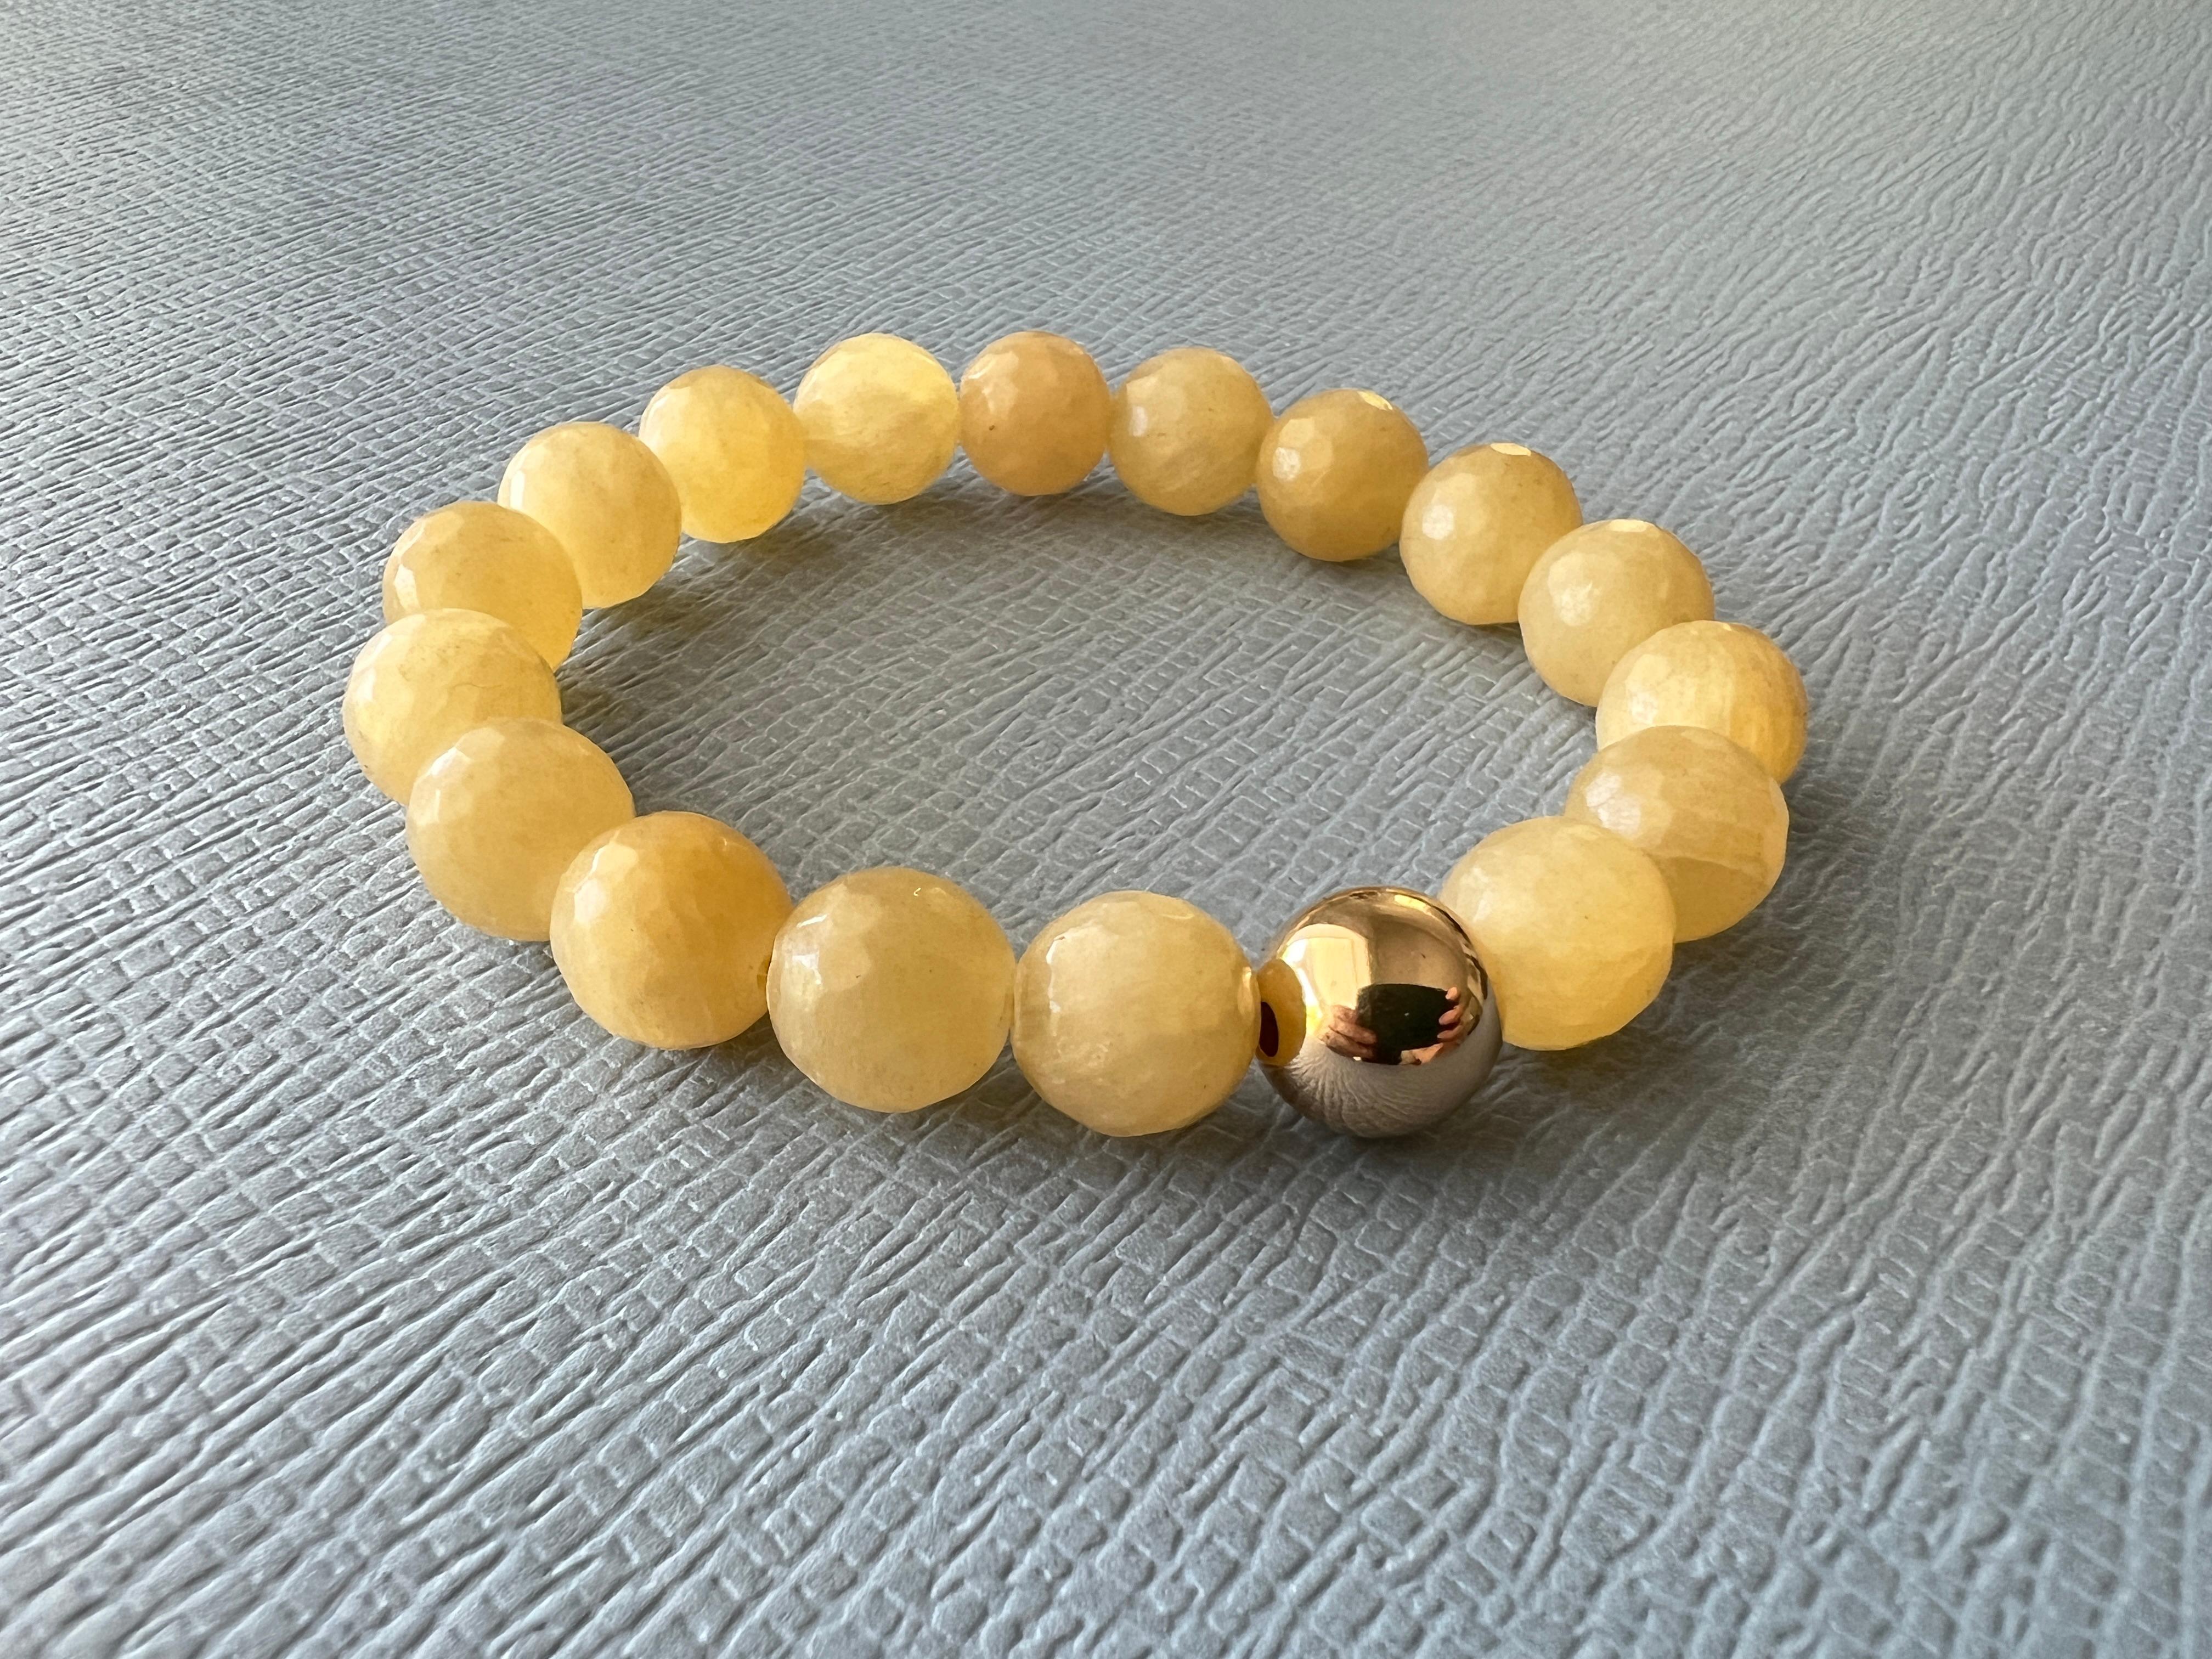 Yellow Calcite Round Facteted Bead Bracelet Gold Filled Bead J Dauphin For Sale 1